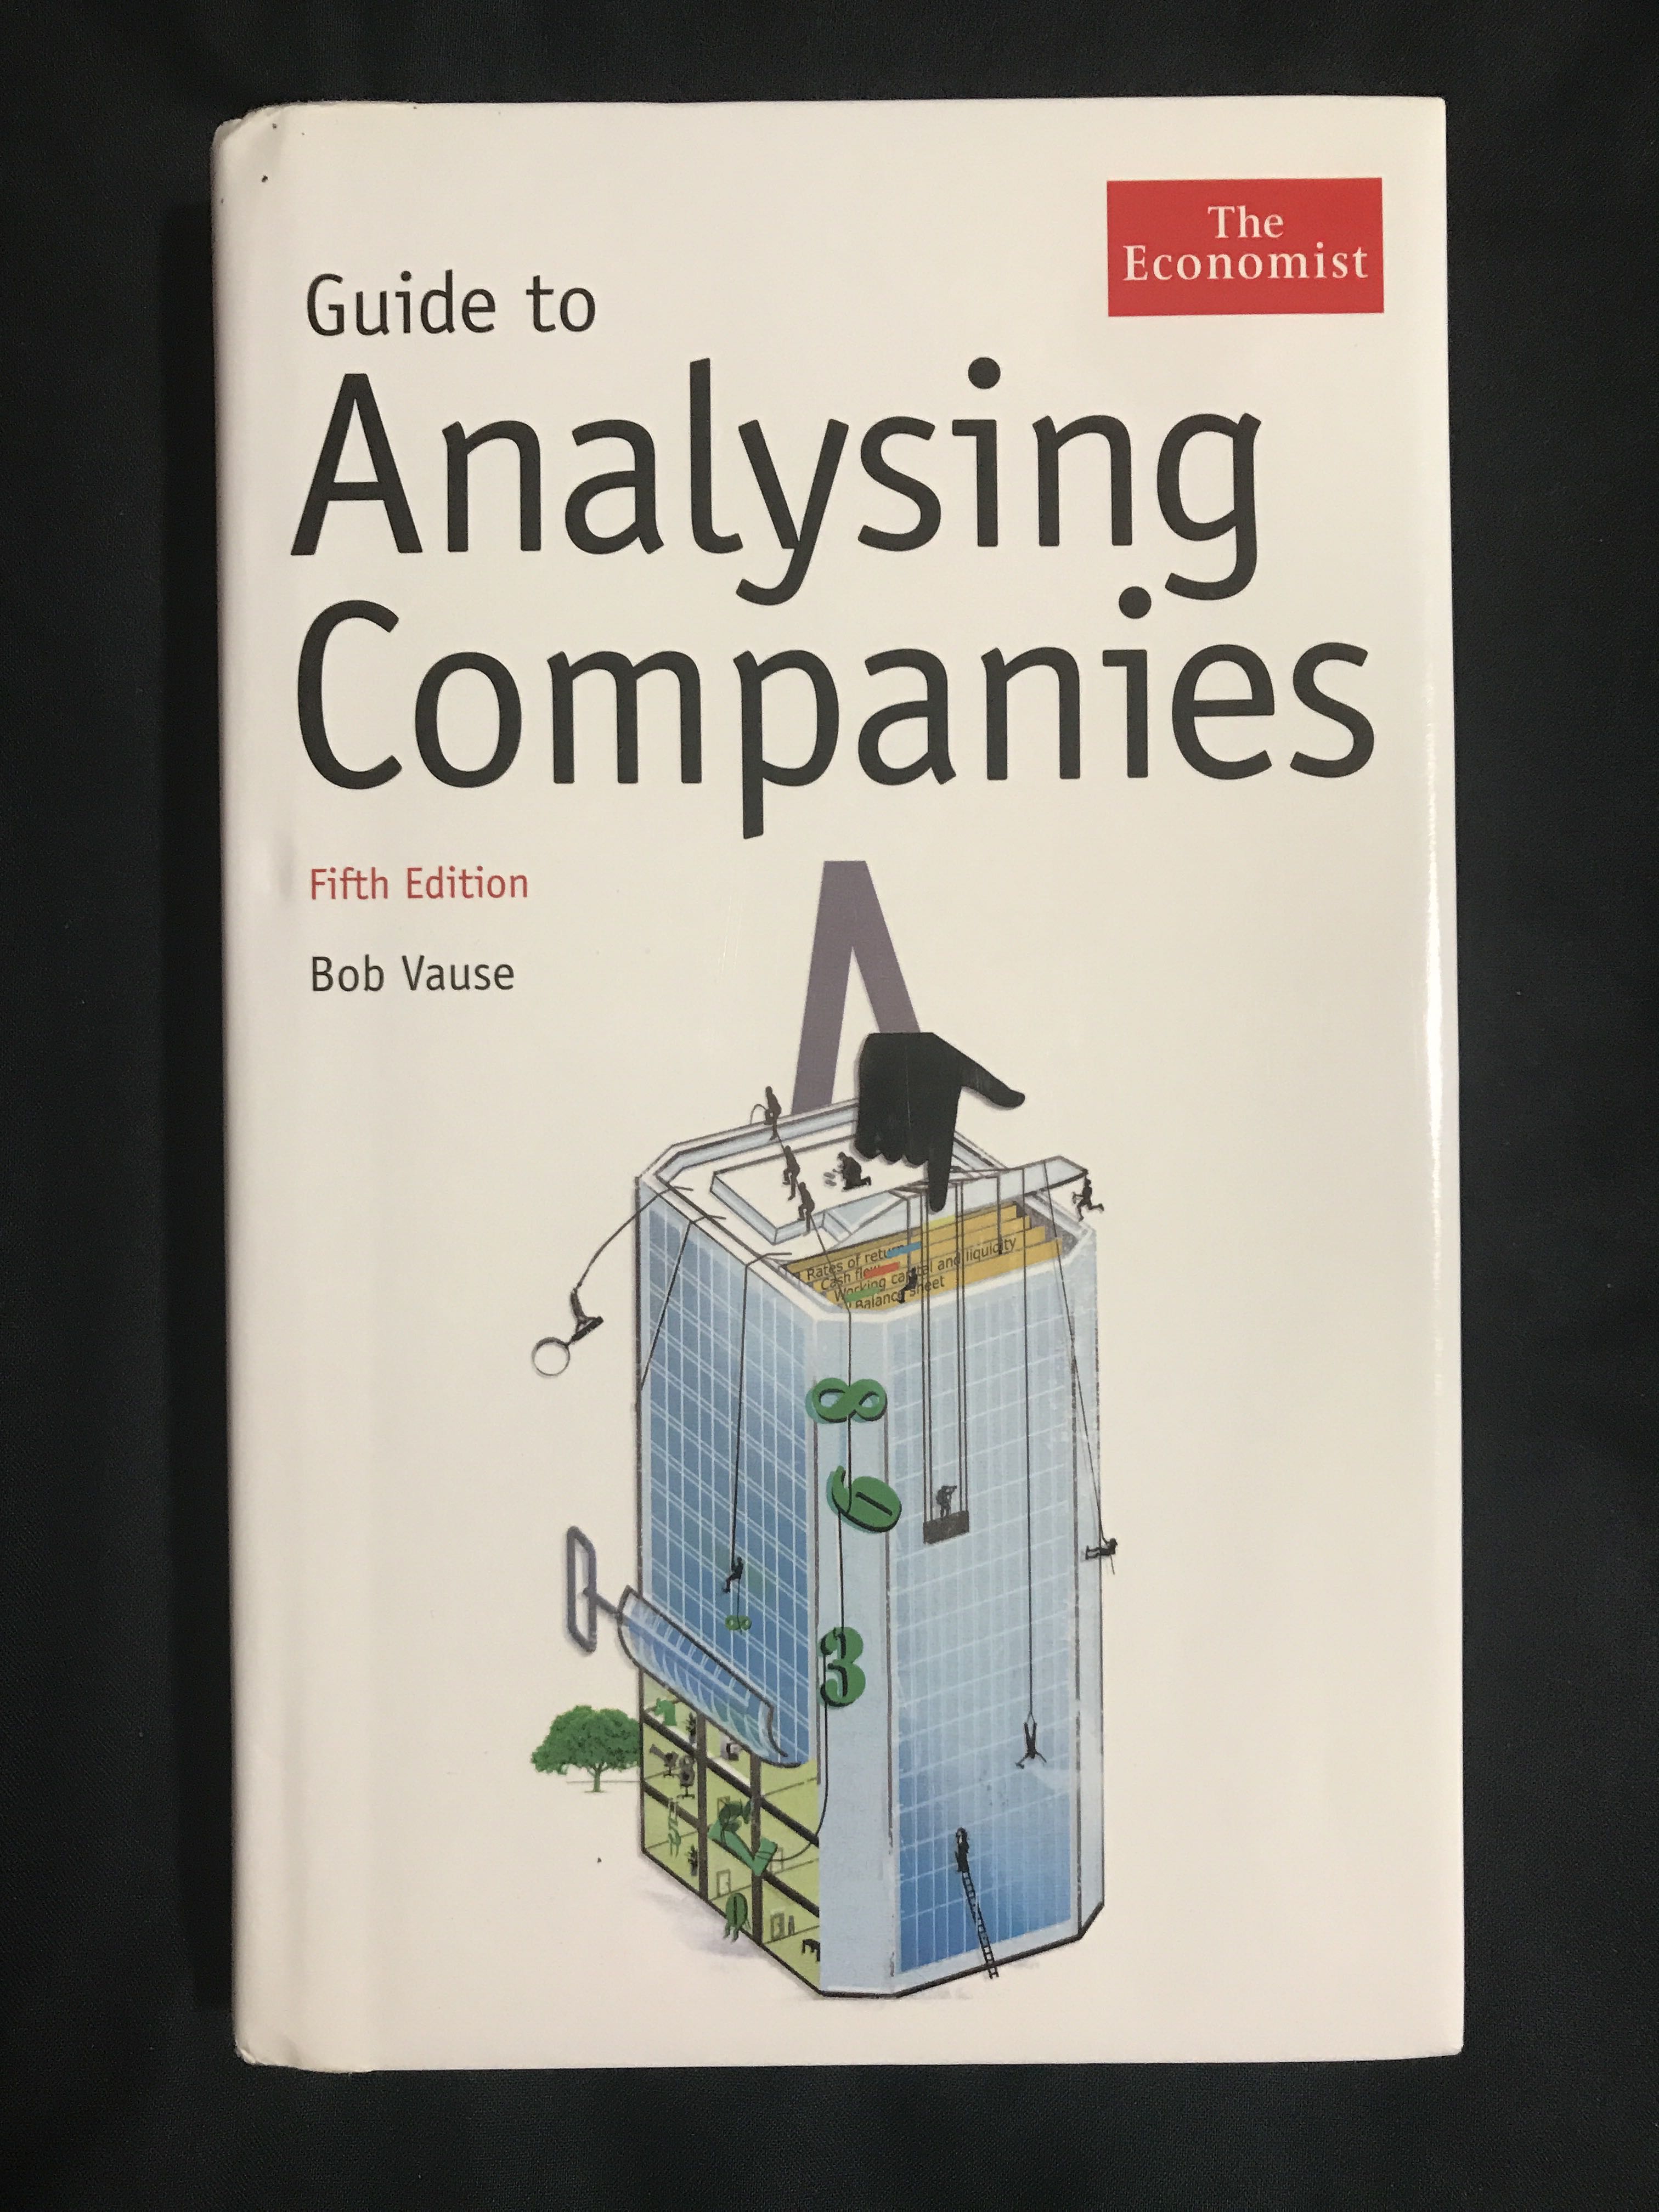 Guide to Analysing Companies (The Economist) by Bob Vause